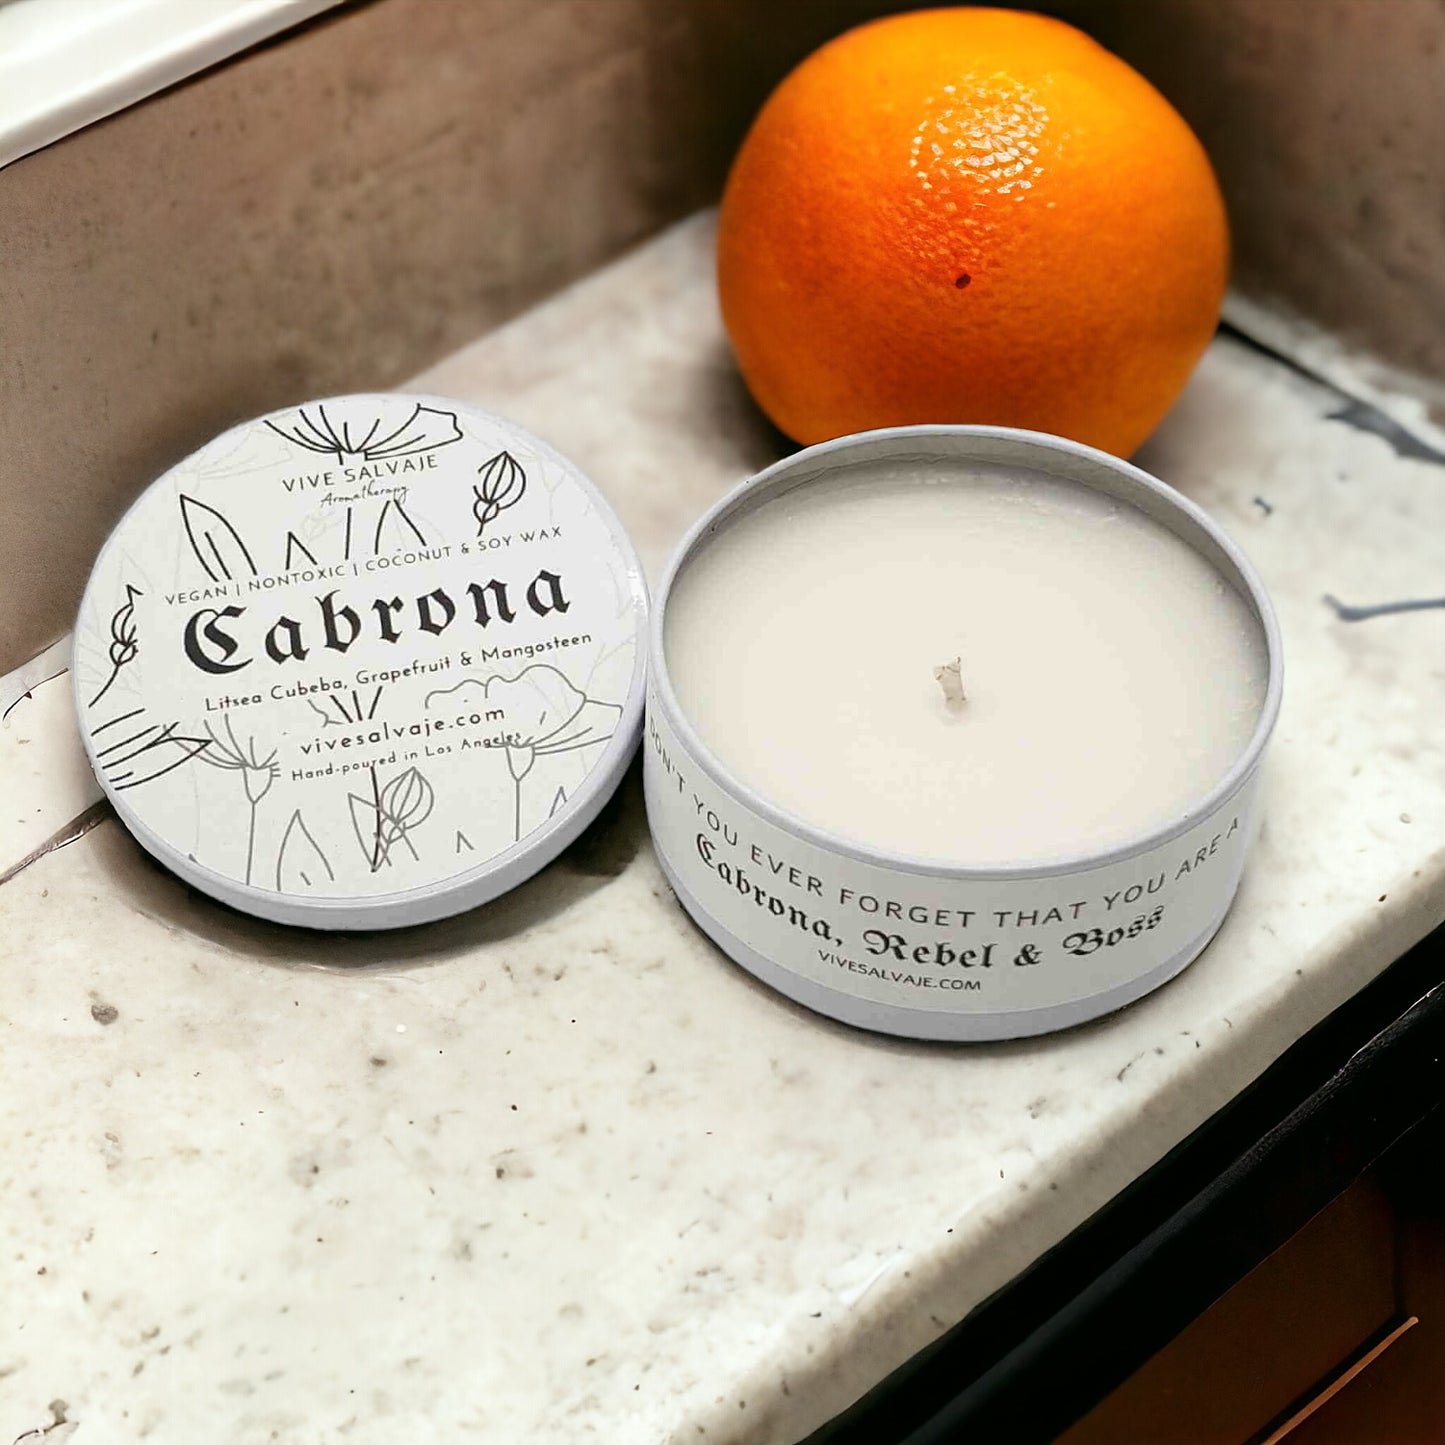 The Cabrona candle with the lid on the side next to an orange on a granite counter